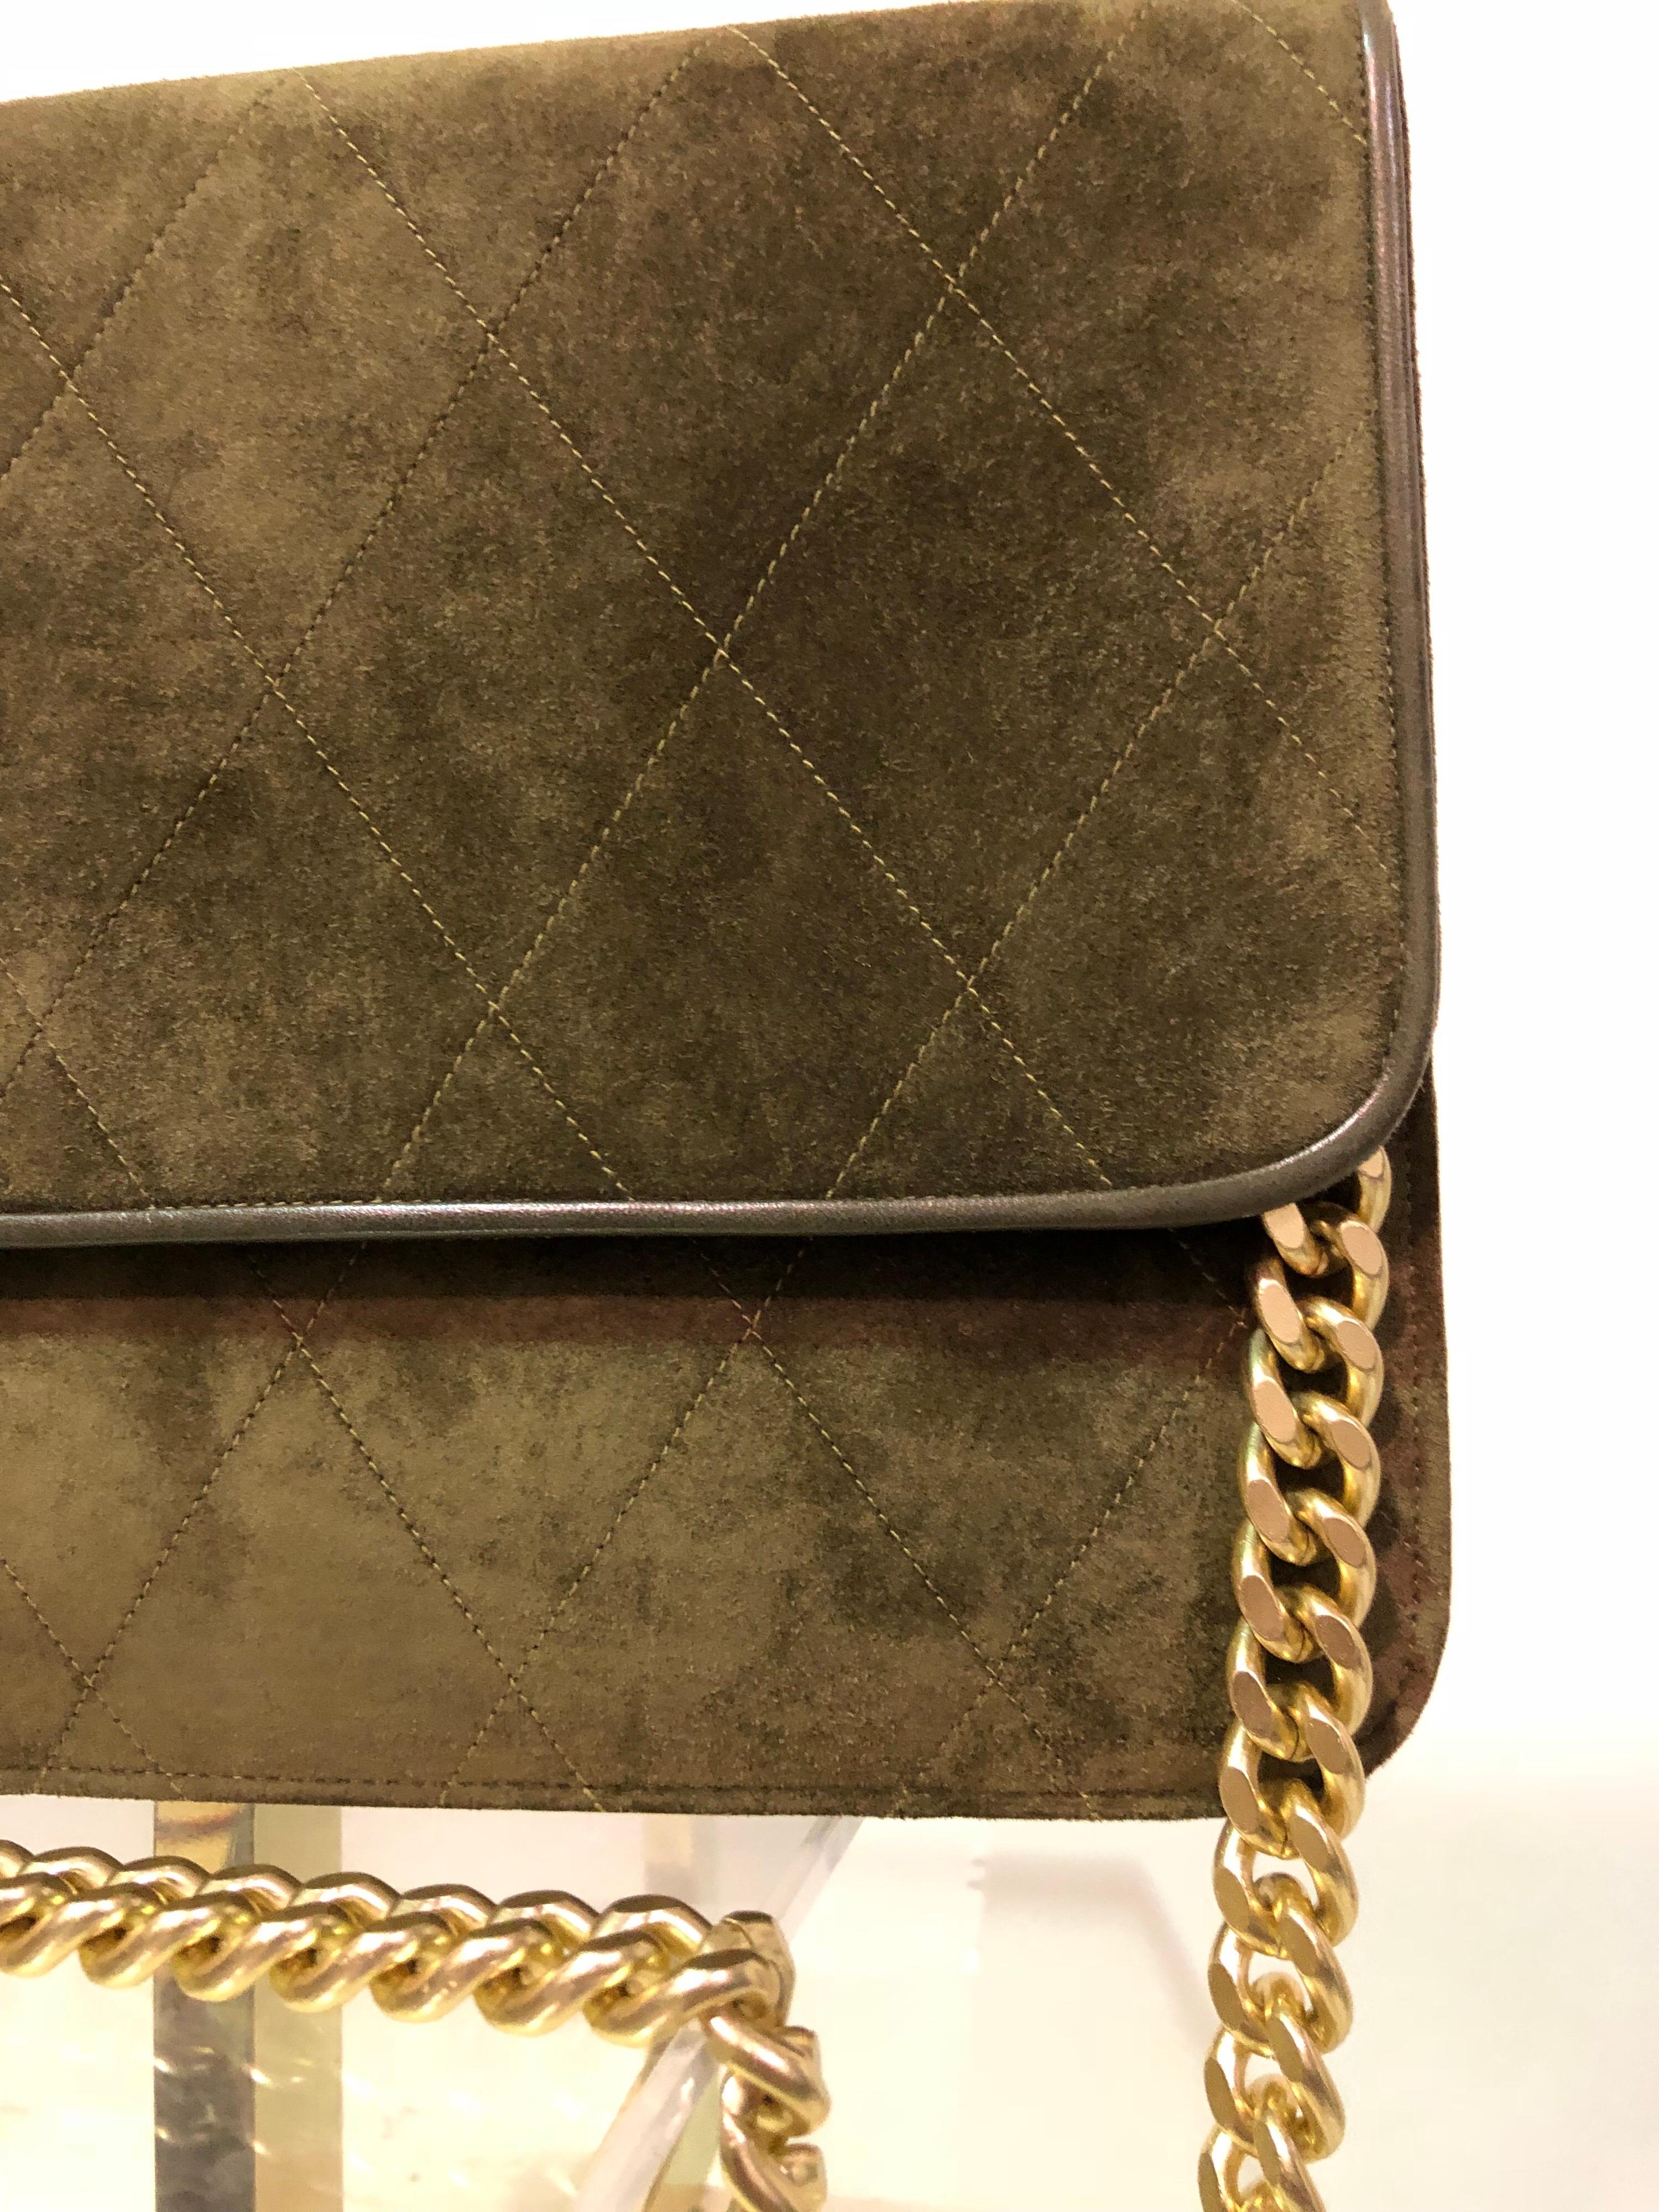 This classic RAYNE of London olive suede quilted leather handbag from the 1980's is in perfect condition and features a snap closure and brushed gold chain handle. 
RAYNE has been manufacturing high end goods for the Royal Family of England as well